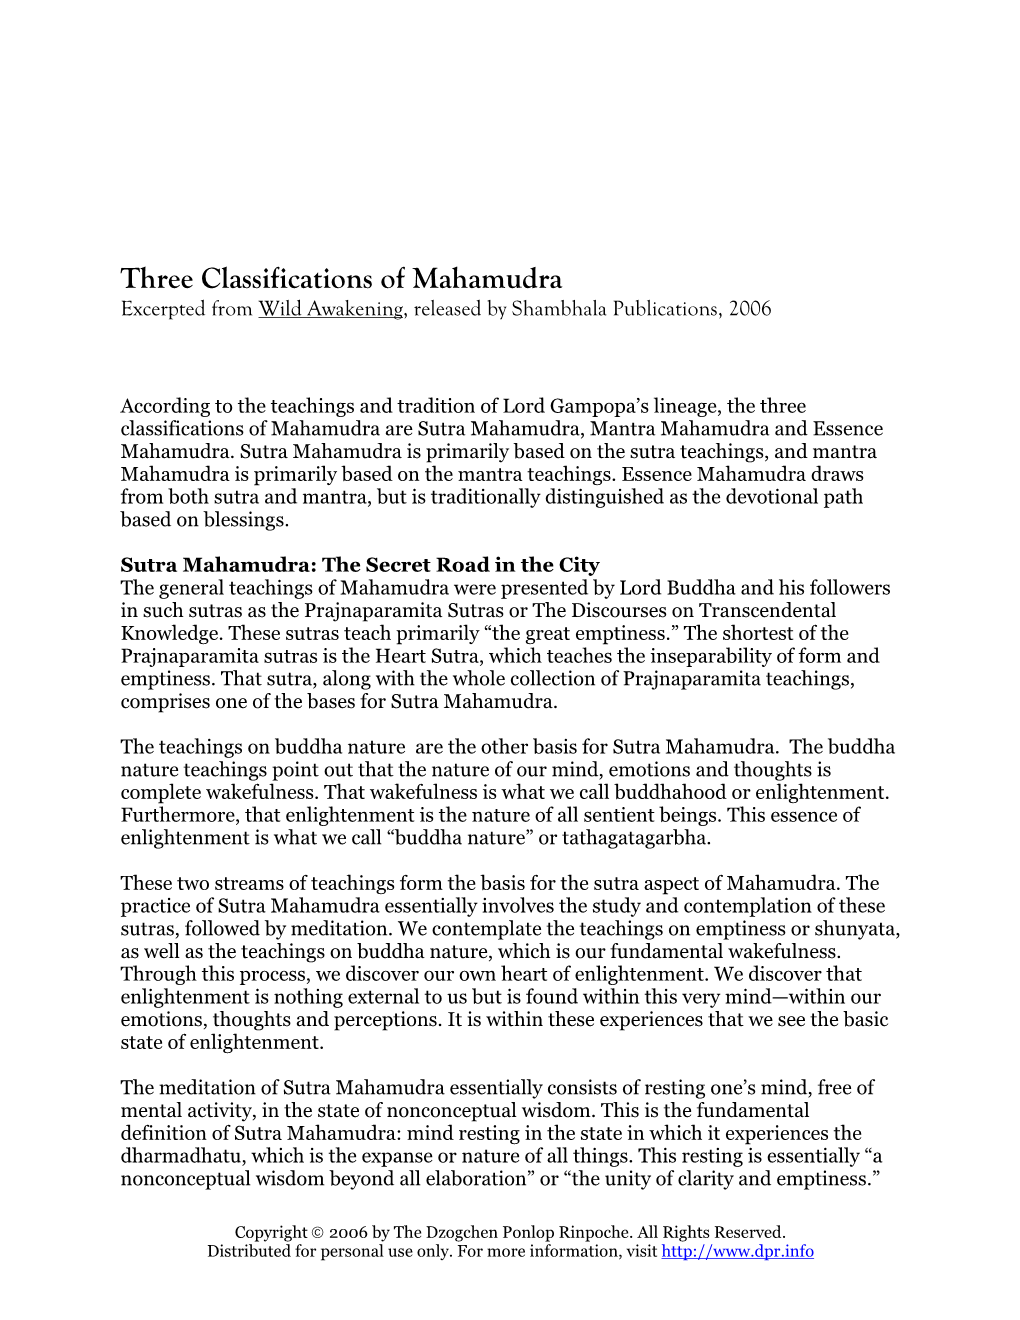 Three Classifications of Mahamudra Excerpted from Wild Awakening , Released by Shambhala Publications, 2006